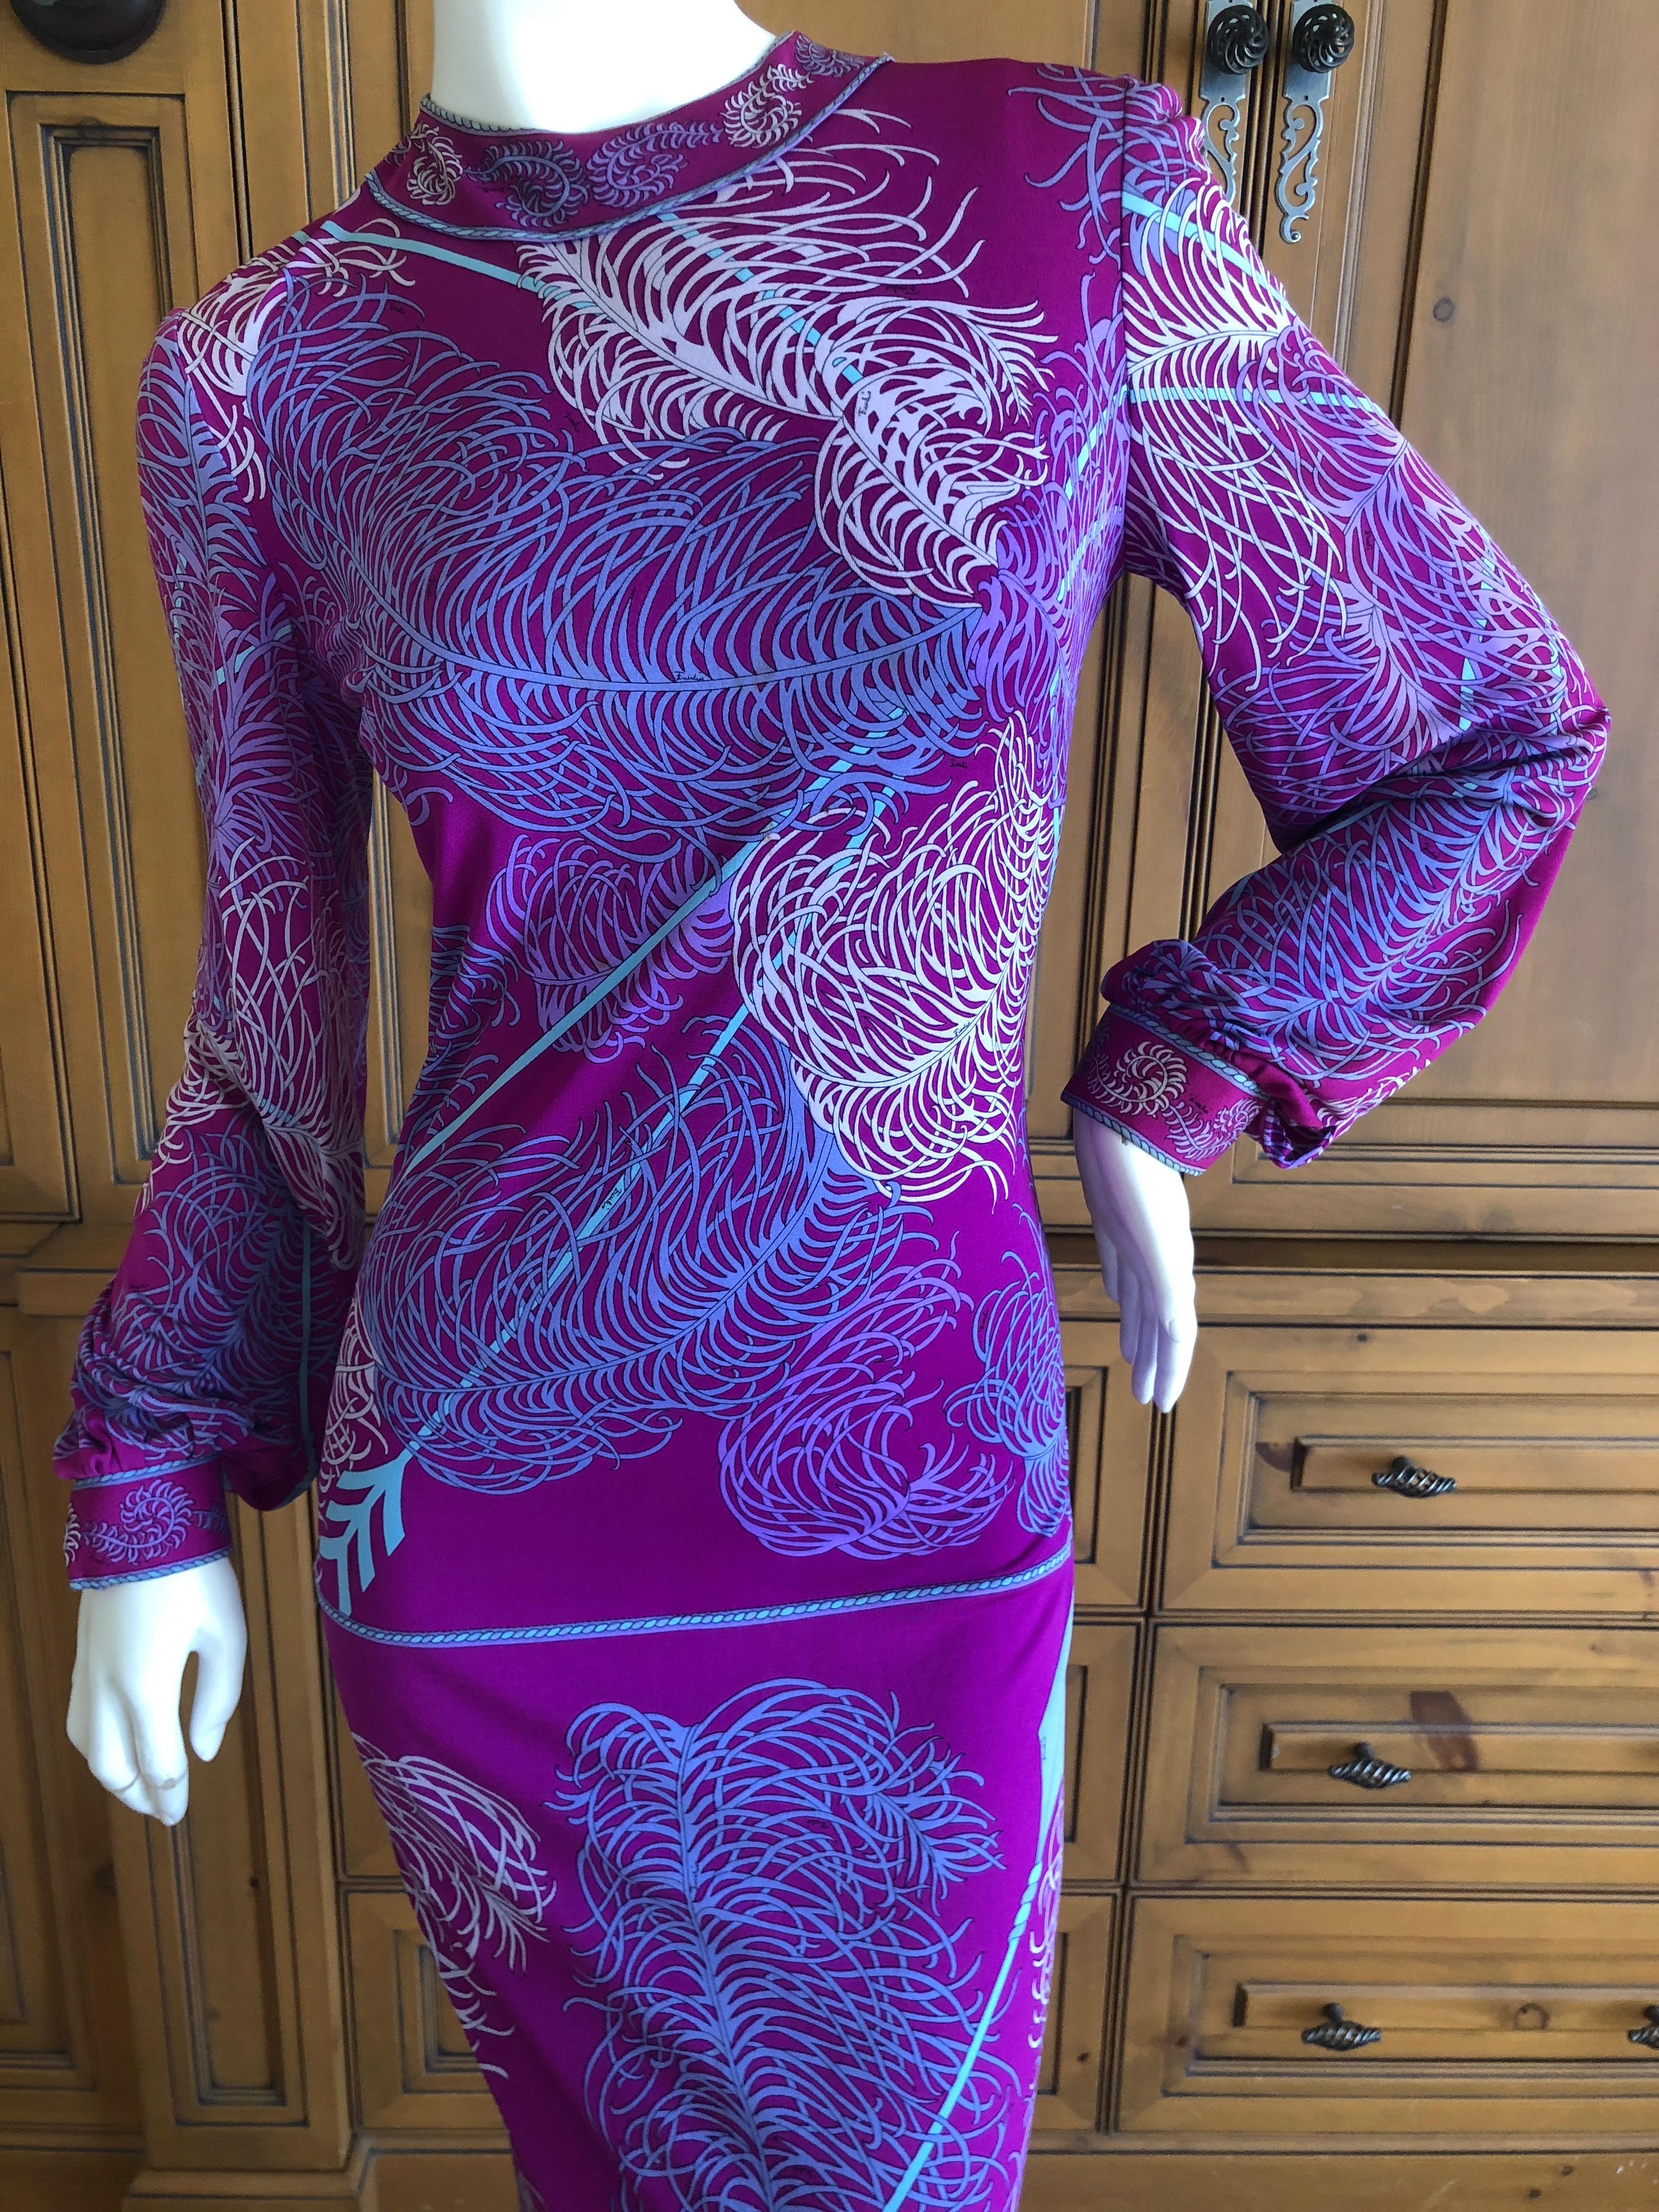 Emilio Pucci Vintage 1960's Silk Jersey Evening Dress for Saks Fifth Avenue In Excellent Condition For Sale In Cloverdale, CA